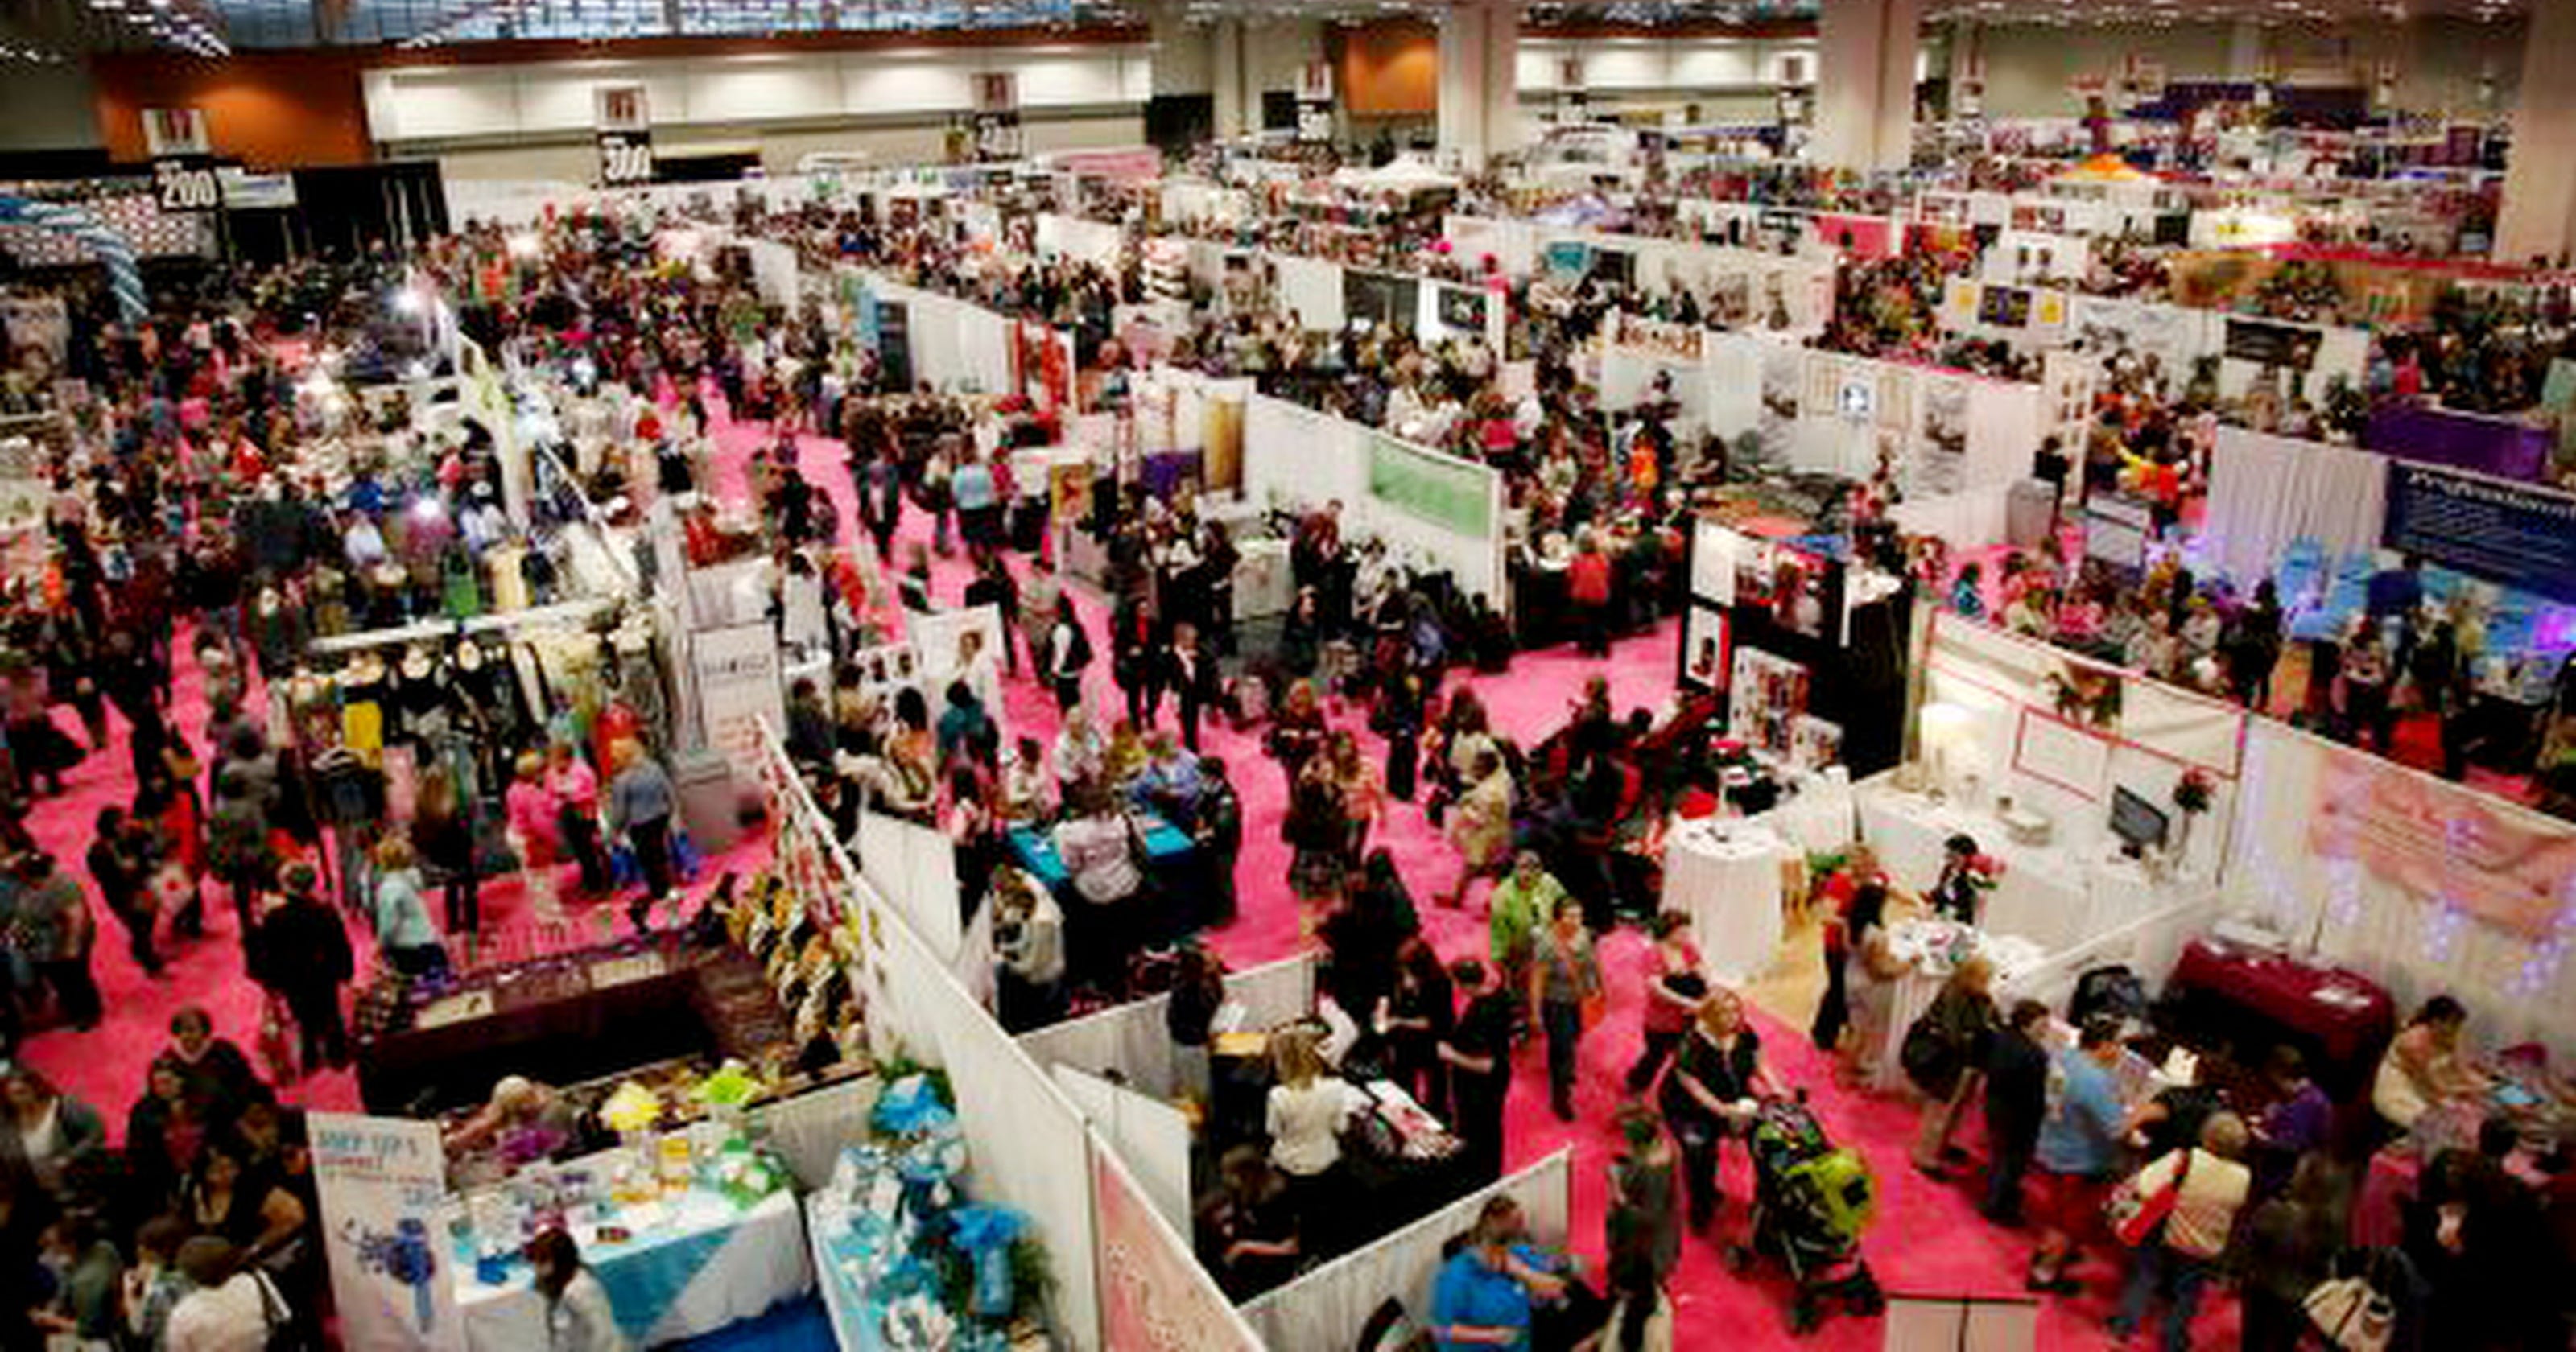 Southern Women's Show in Nashville How to get the most out of the show